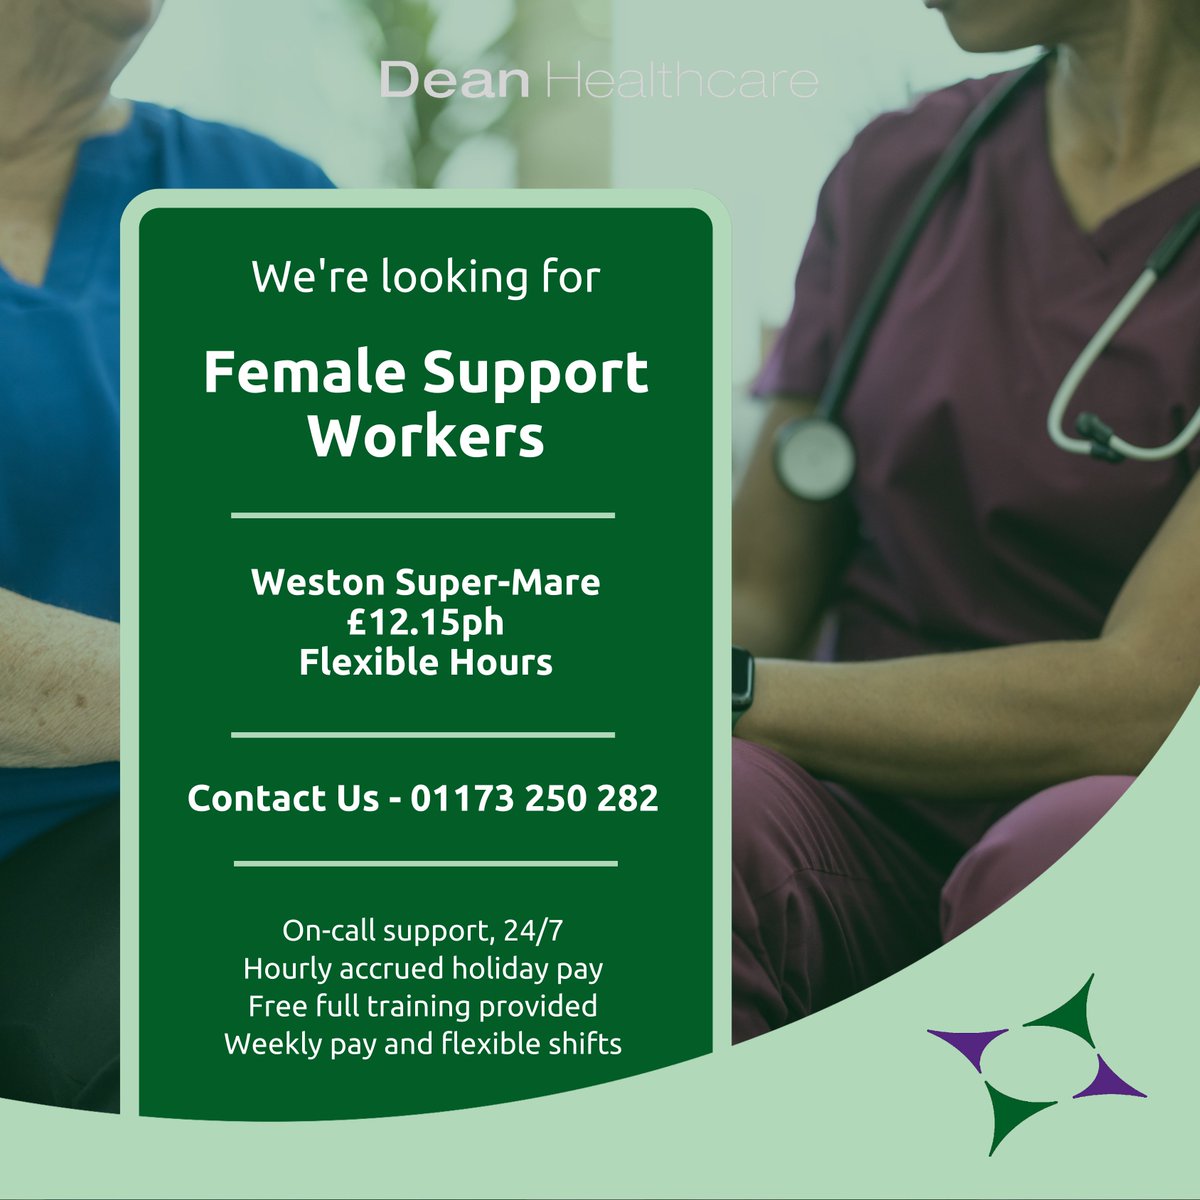 We're looking for Female Support Workers in Weston-Super-Mare. If you have at least 6 months of UK care experience in a similar environment, we'd love to hear from you!

Contact our friendly team today on 01173 250 282

#supportwork #supportworker #healthcare #healthcareheroes